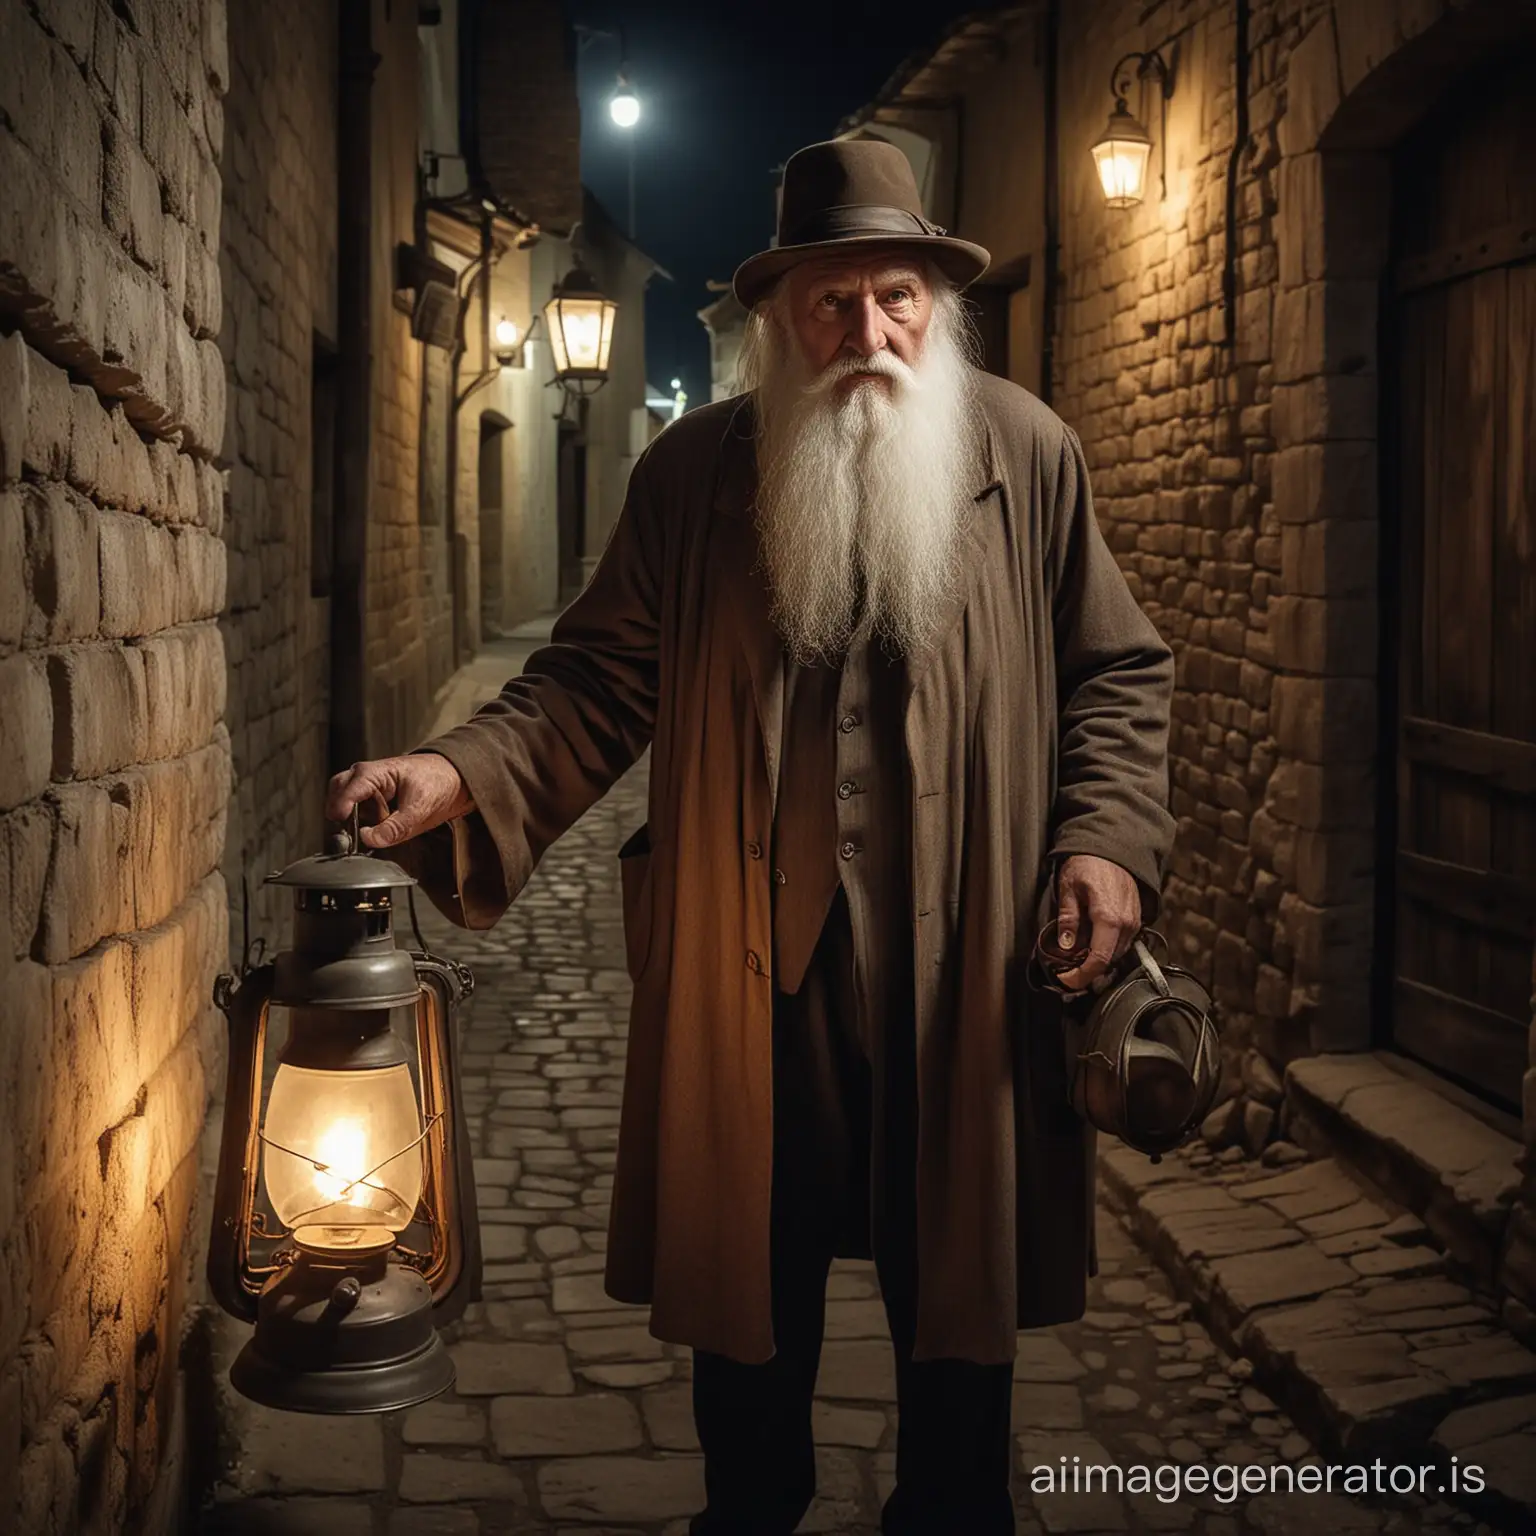 Mysterious-Night-Encounter-Enigmatic-Old-Man-with-Lit-Lamp-in-Medieval-Village-Alley